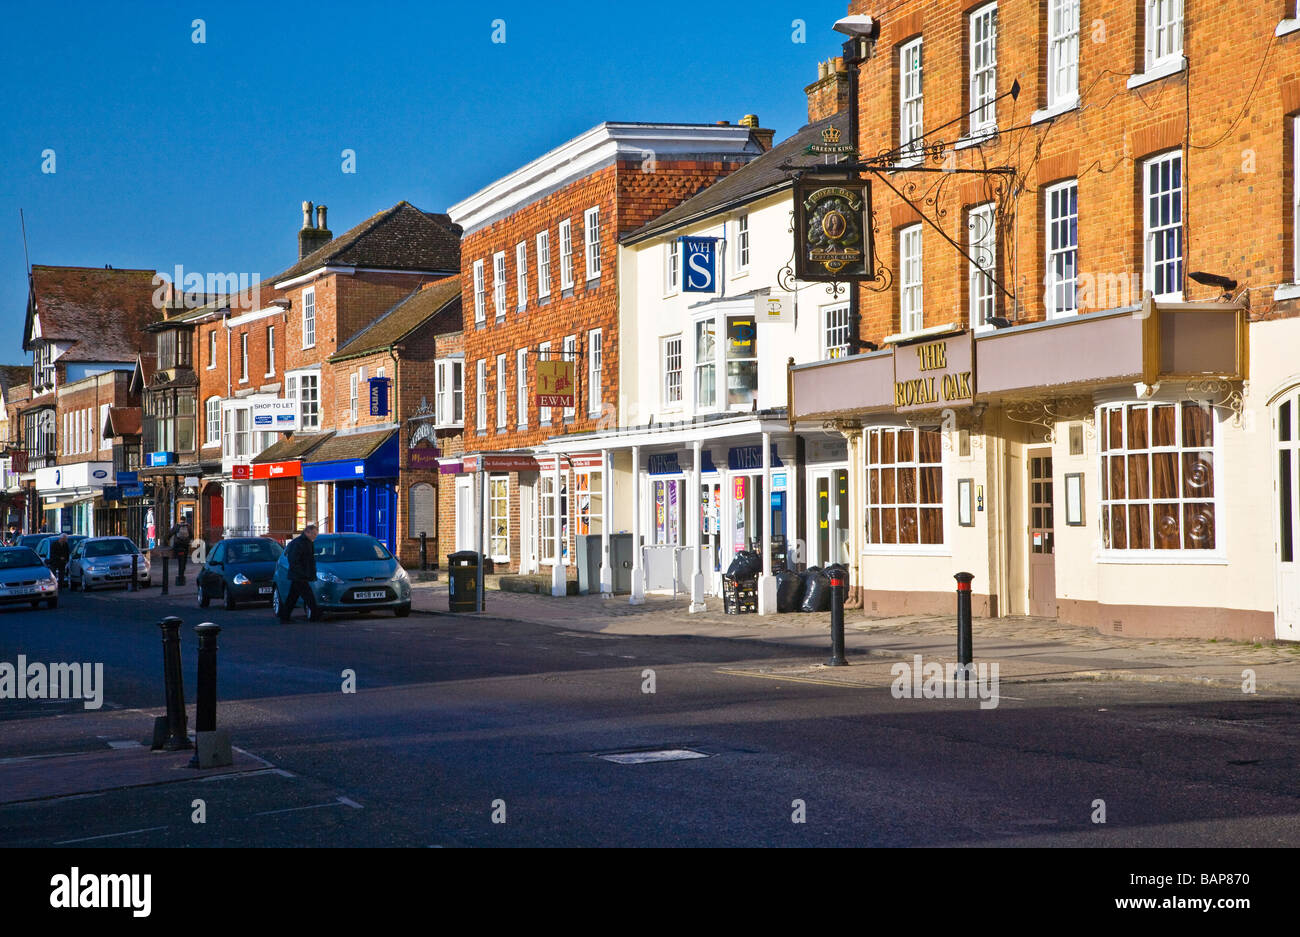 Shops and pub in the High Street in the typical English market town of Marlborough Wiltshire England UK Stock Photo